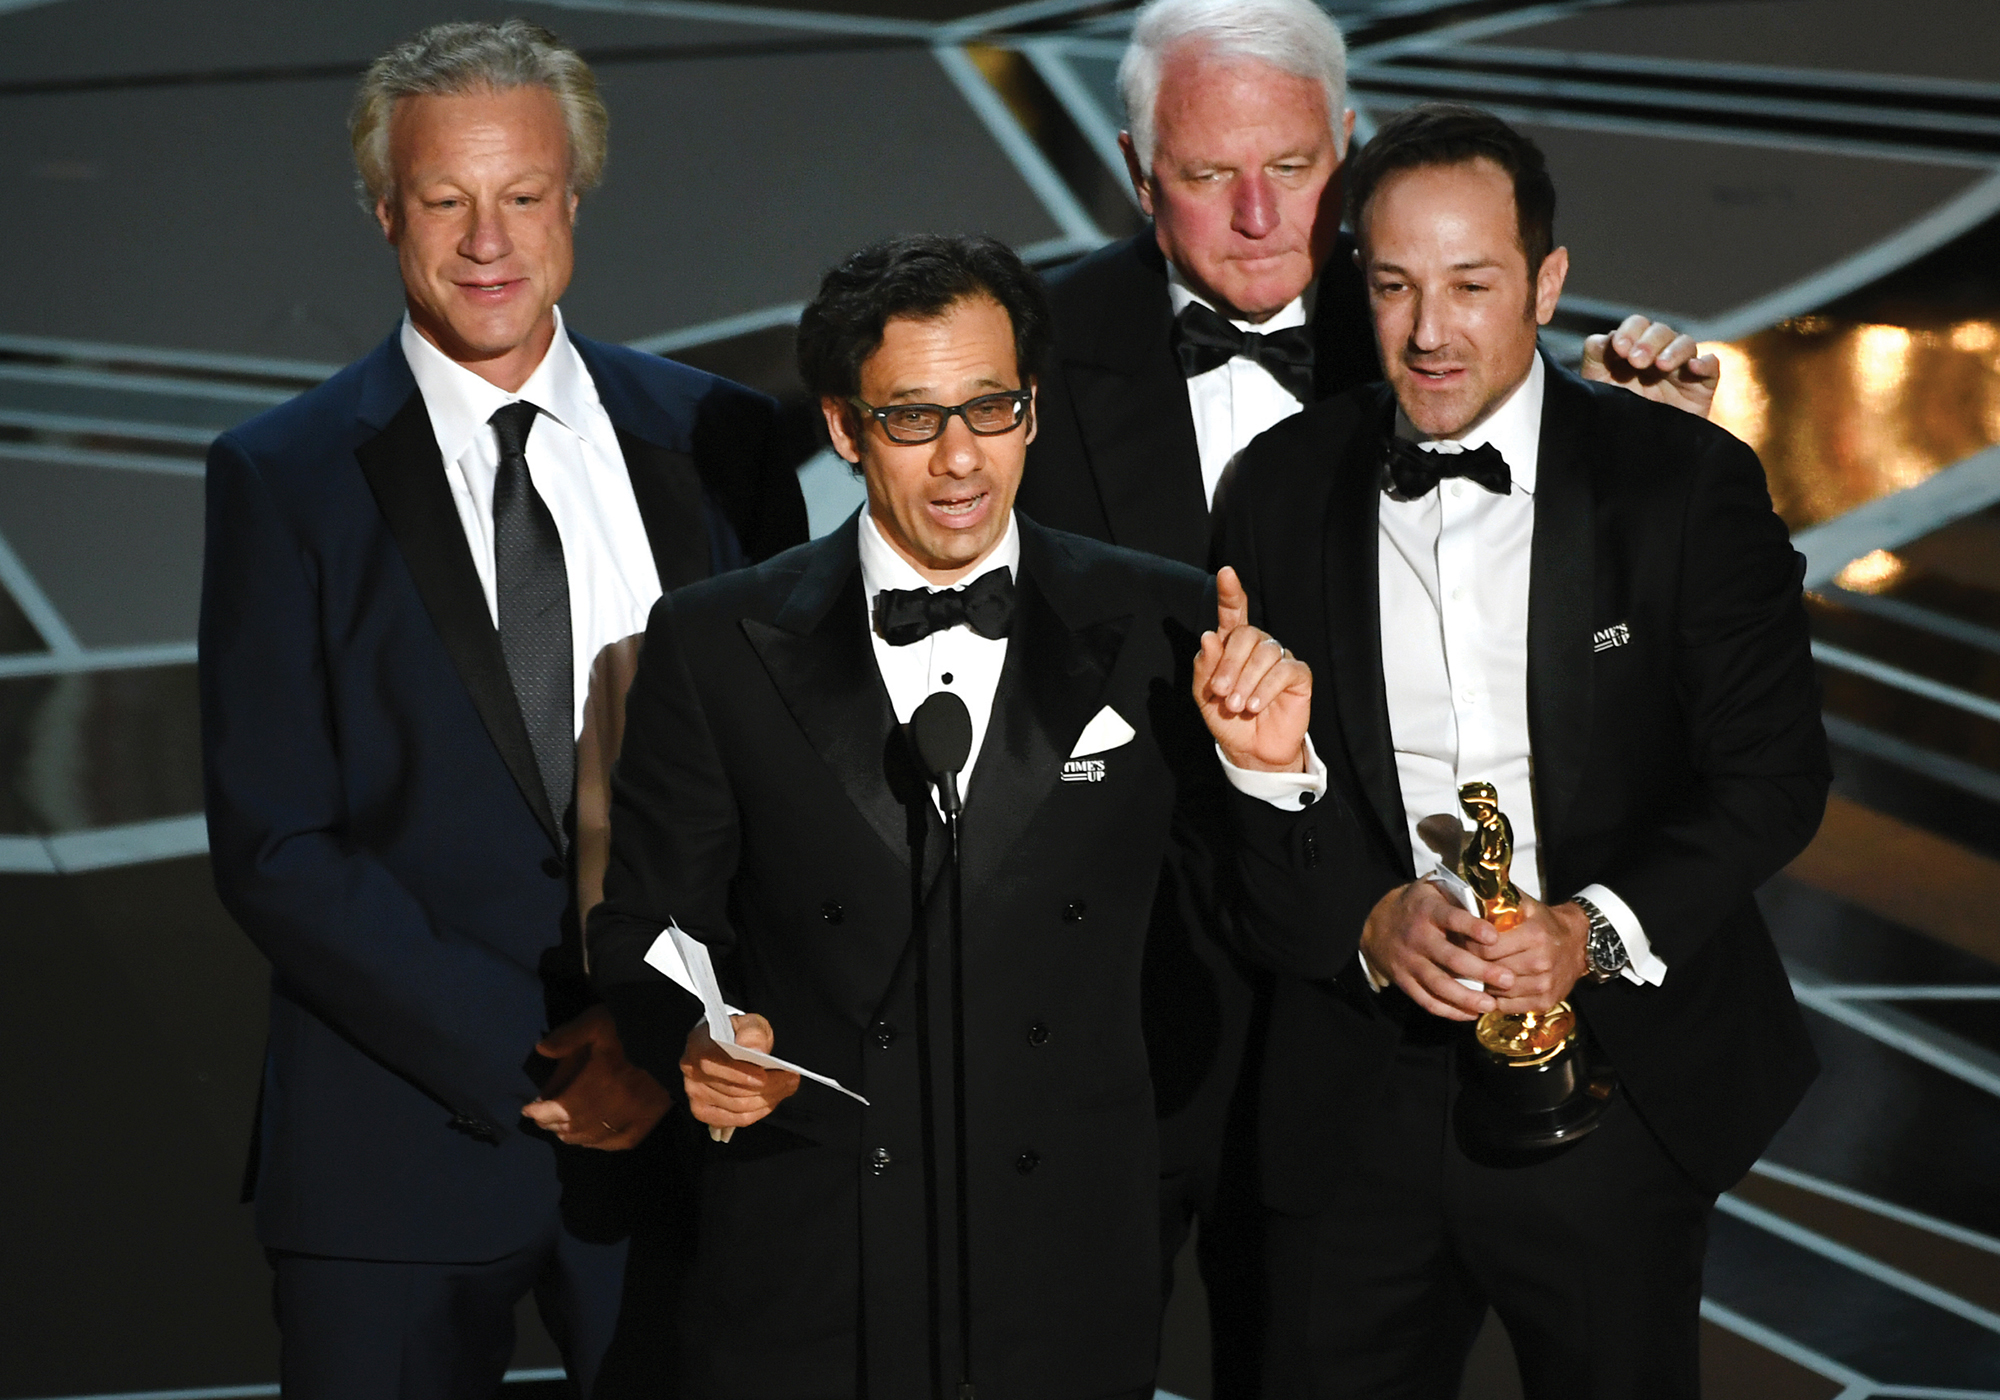 David Fialkow, director Dan Cogan, producer James R. Swartz, and director Bryan Fogel accept Best Documentary Feature for Icarusduring the 90th Annual Academy Awards. Credit: Kevin Winter/Getty Images